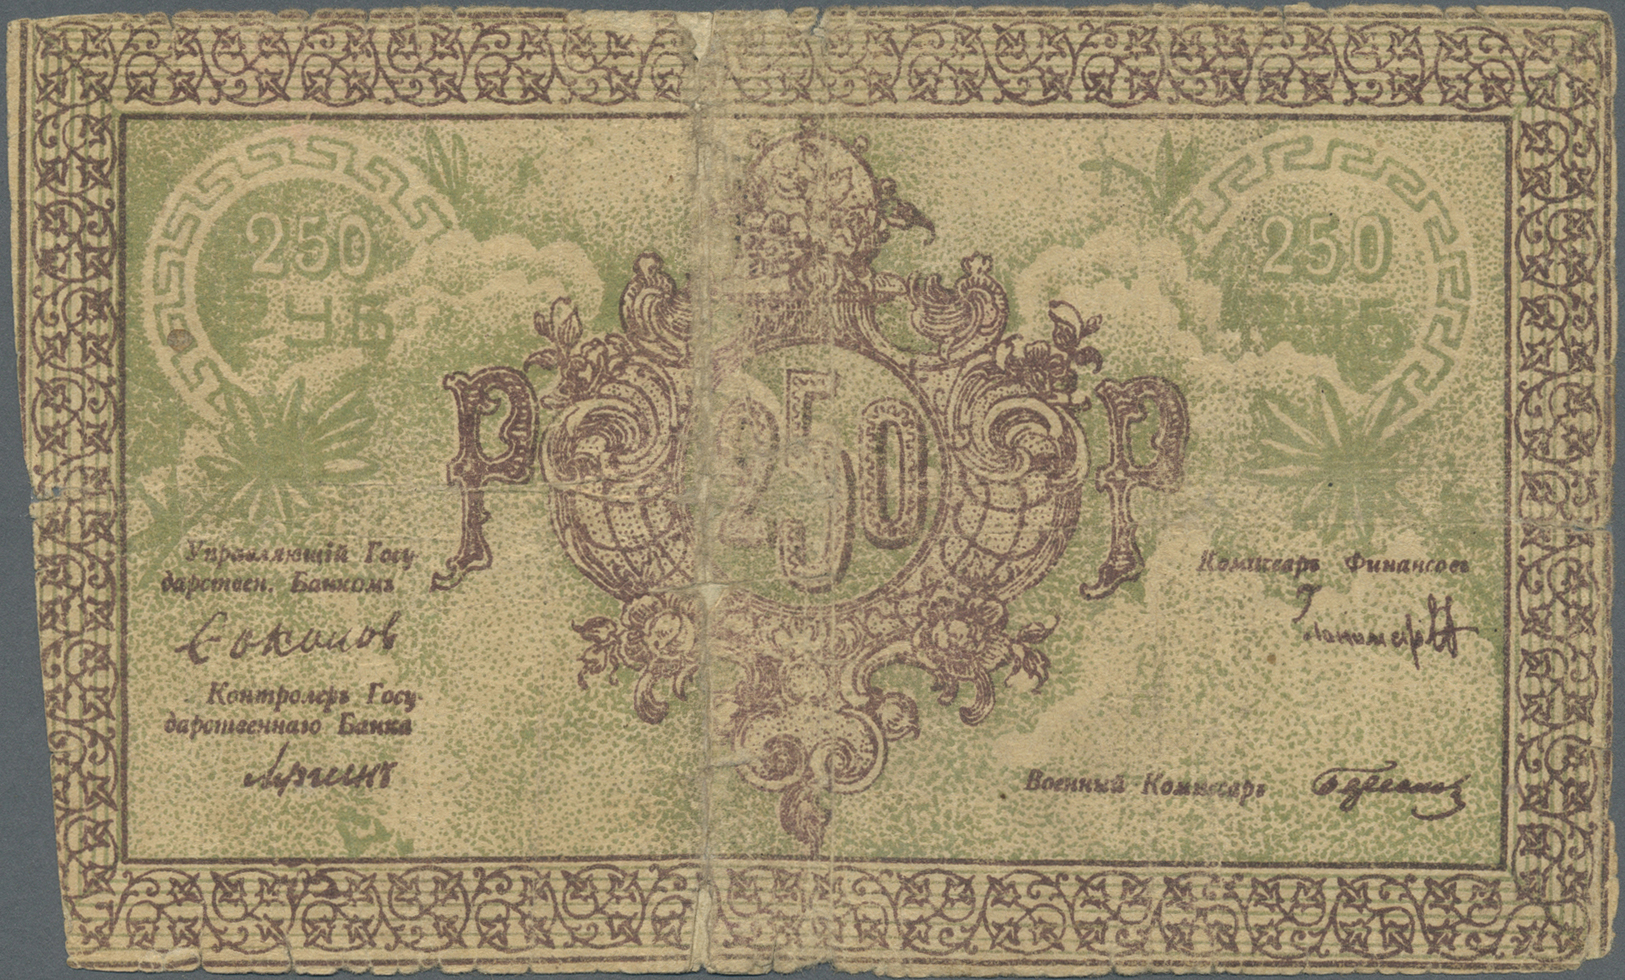 01341 Kazakhstan / Kasachstan: 250 Rubles ND(1918) P. S1125, Stronger Used With Very Strong Center Fold, Borders Worn, B - Kazakhstan